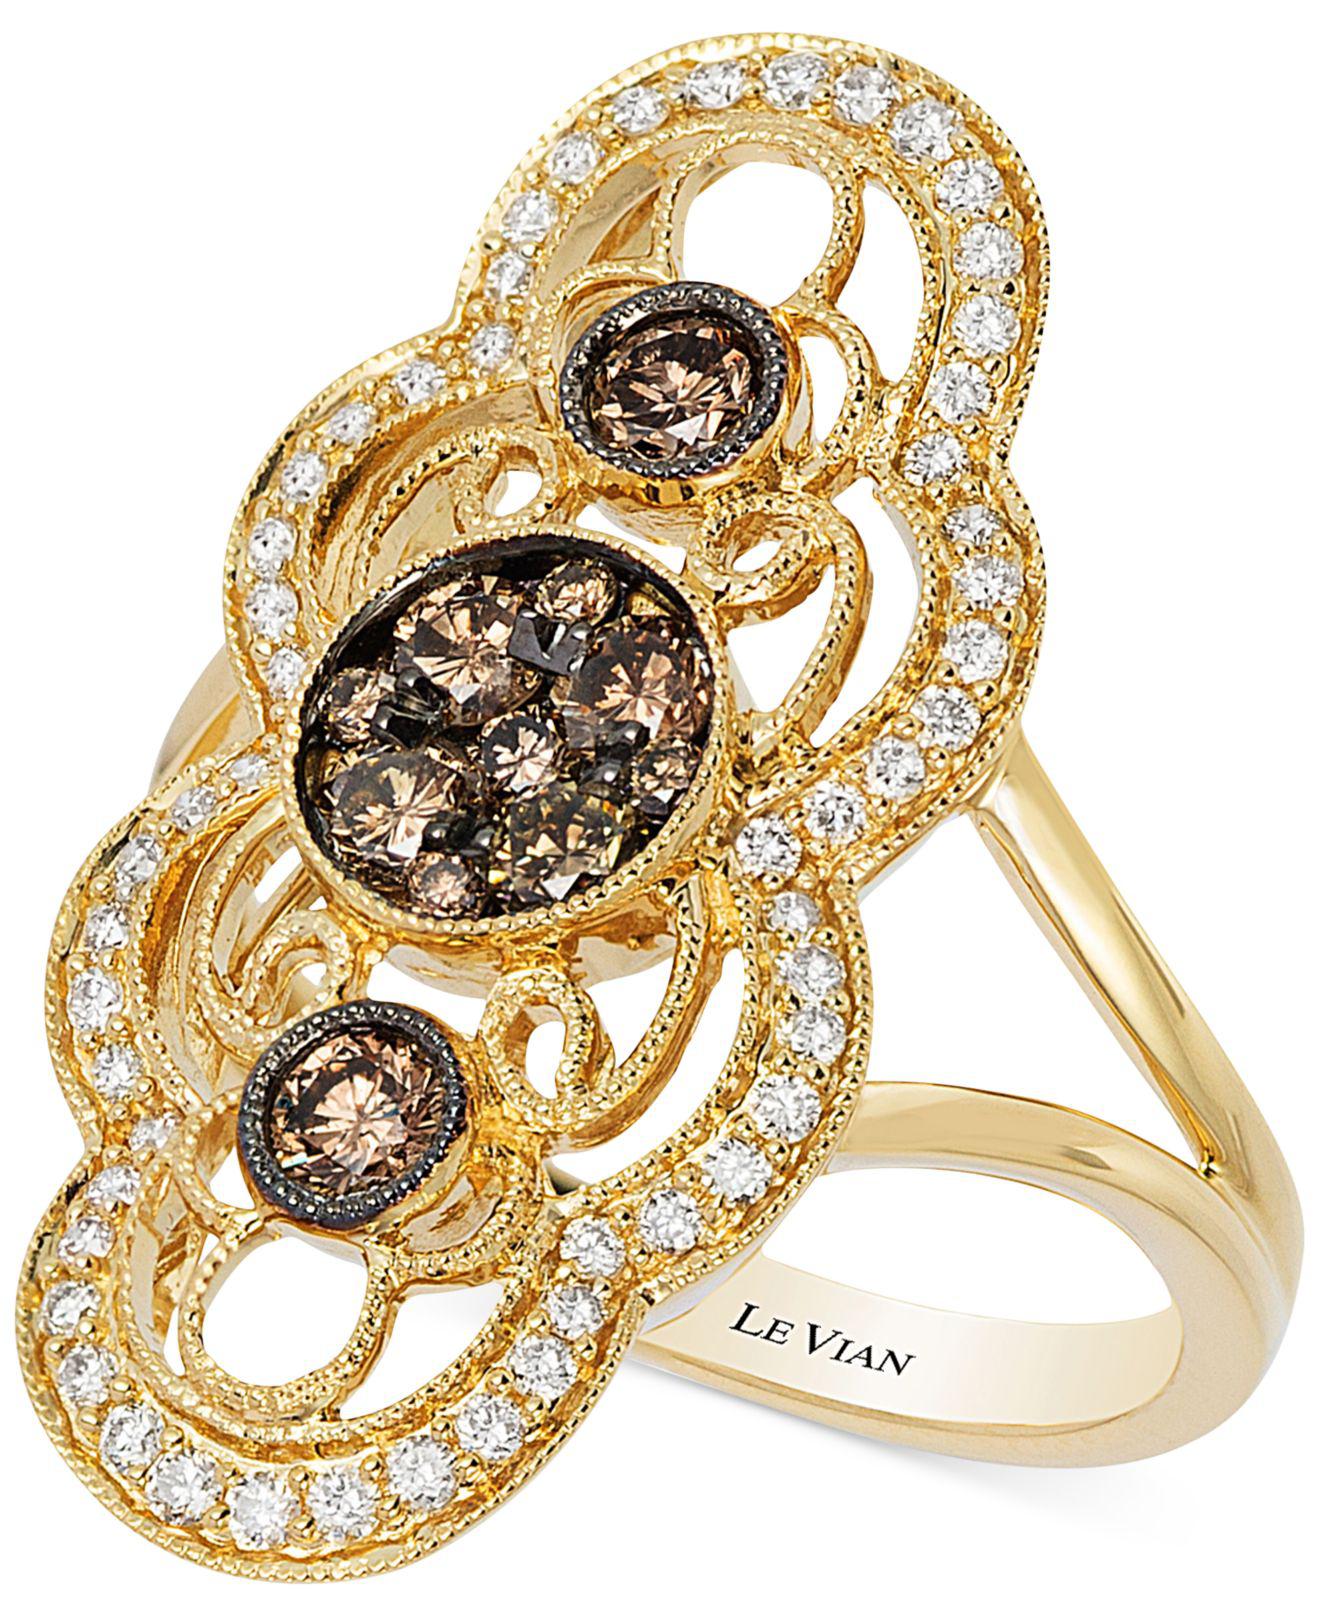 Le Vian Chocolate Diamond Ring 78 Ct Tw In 14k Gold 